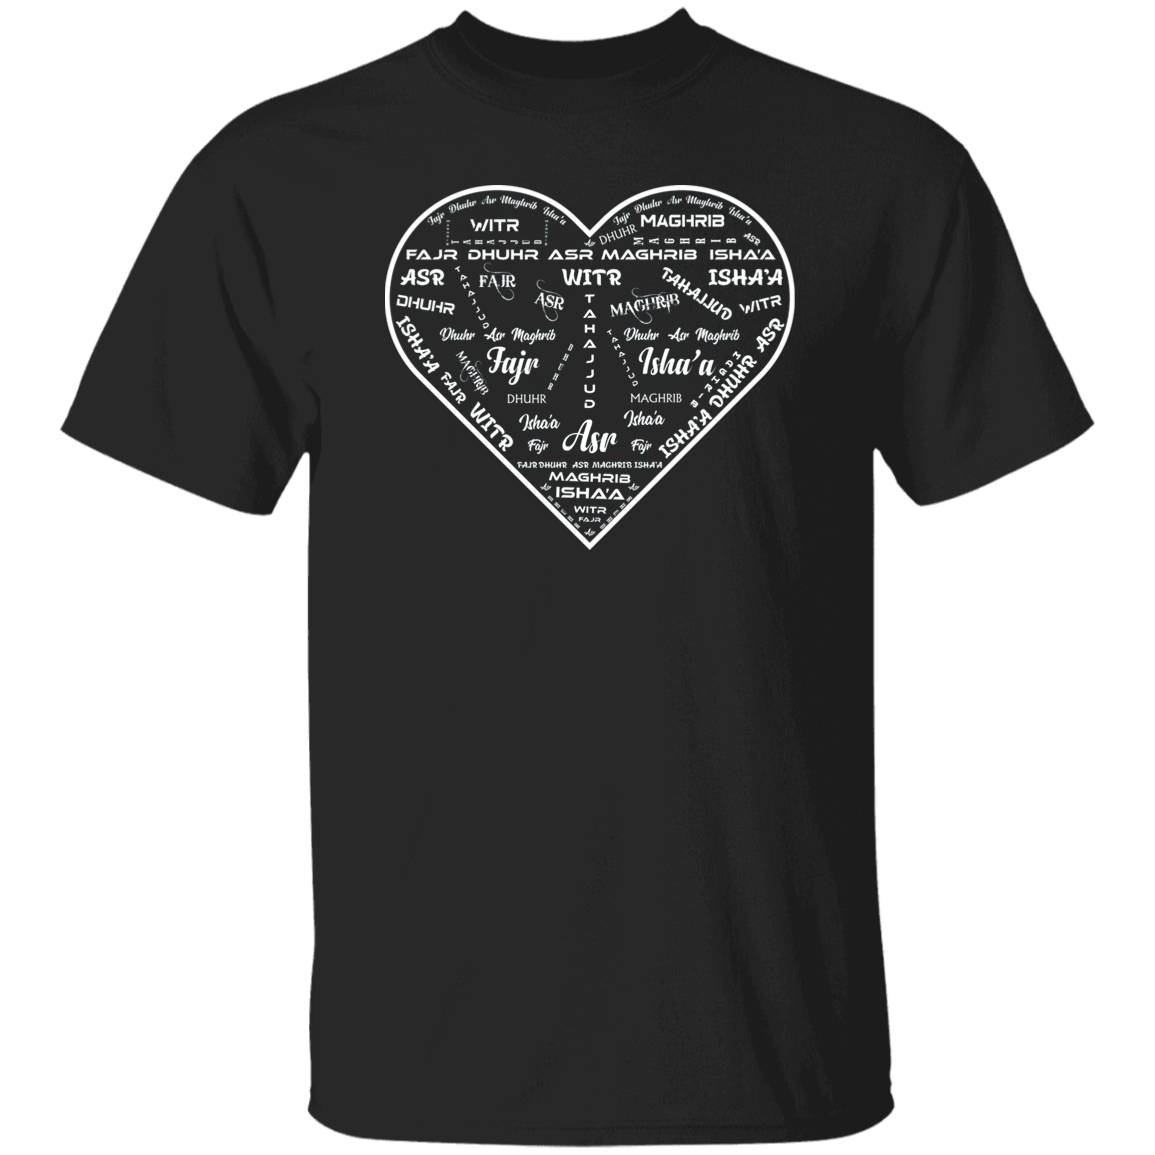 PRAYERS IN A HEART LOGO  T-Shirt (MORE COLOR OPTIONS)